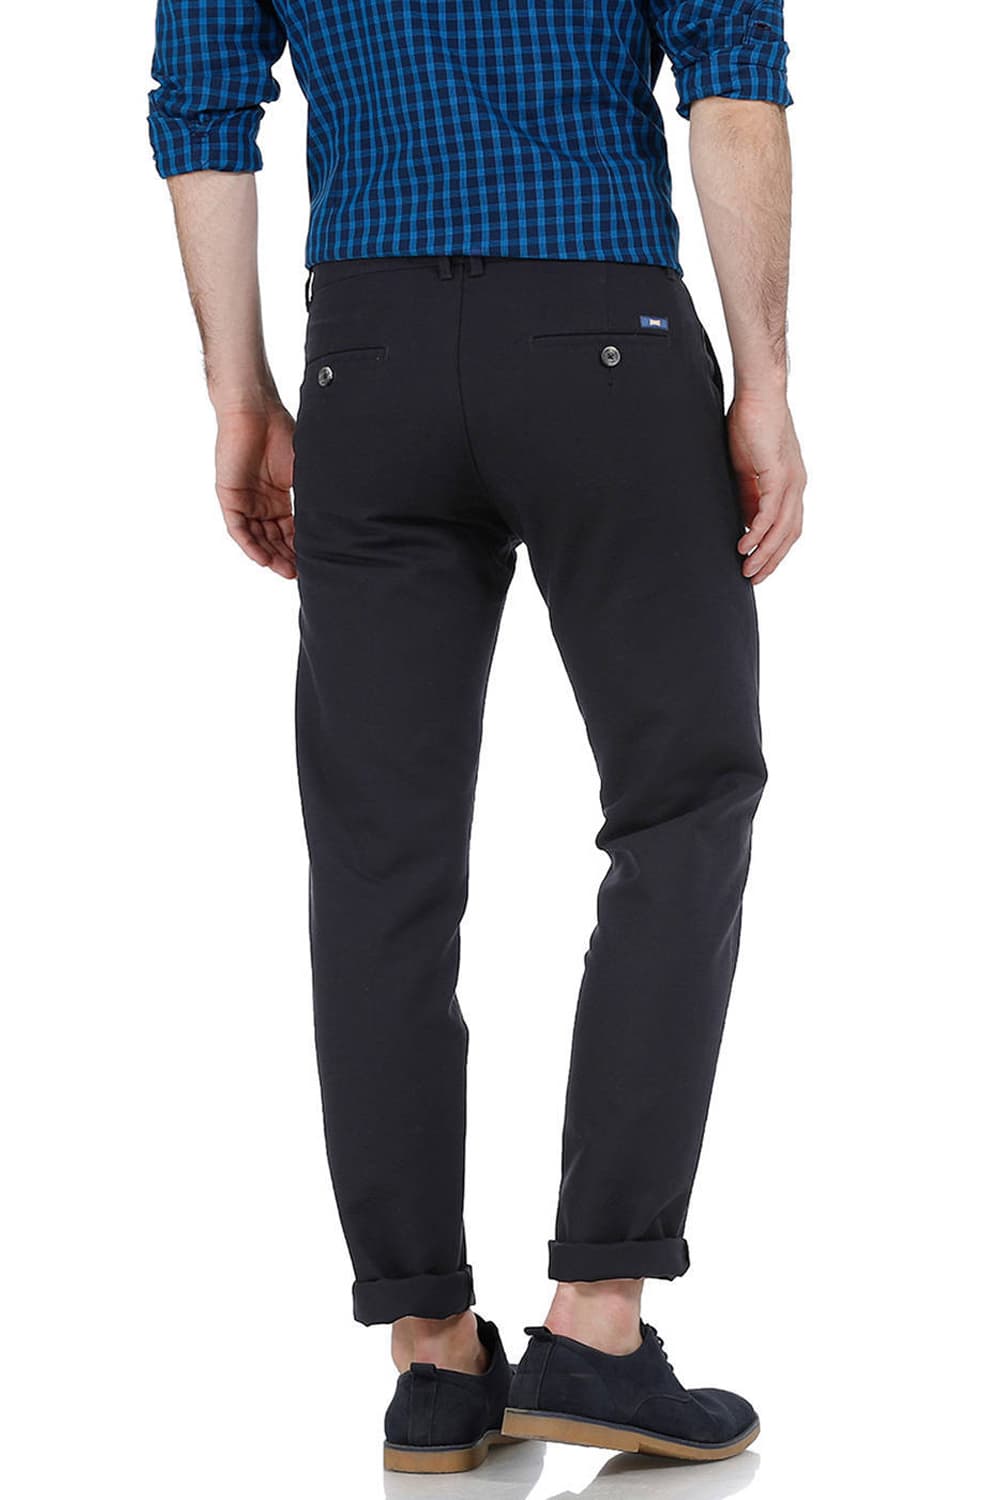 BASICS TAPERED FIT PIRATE COTTON TROUSER